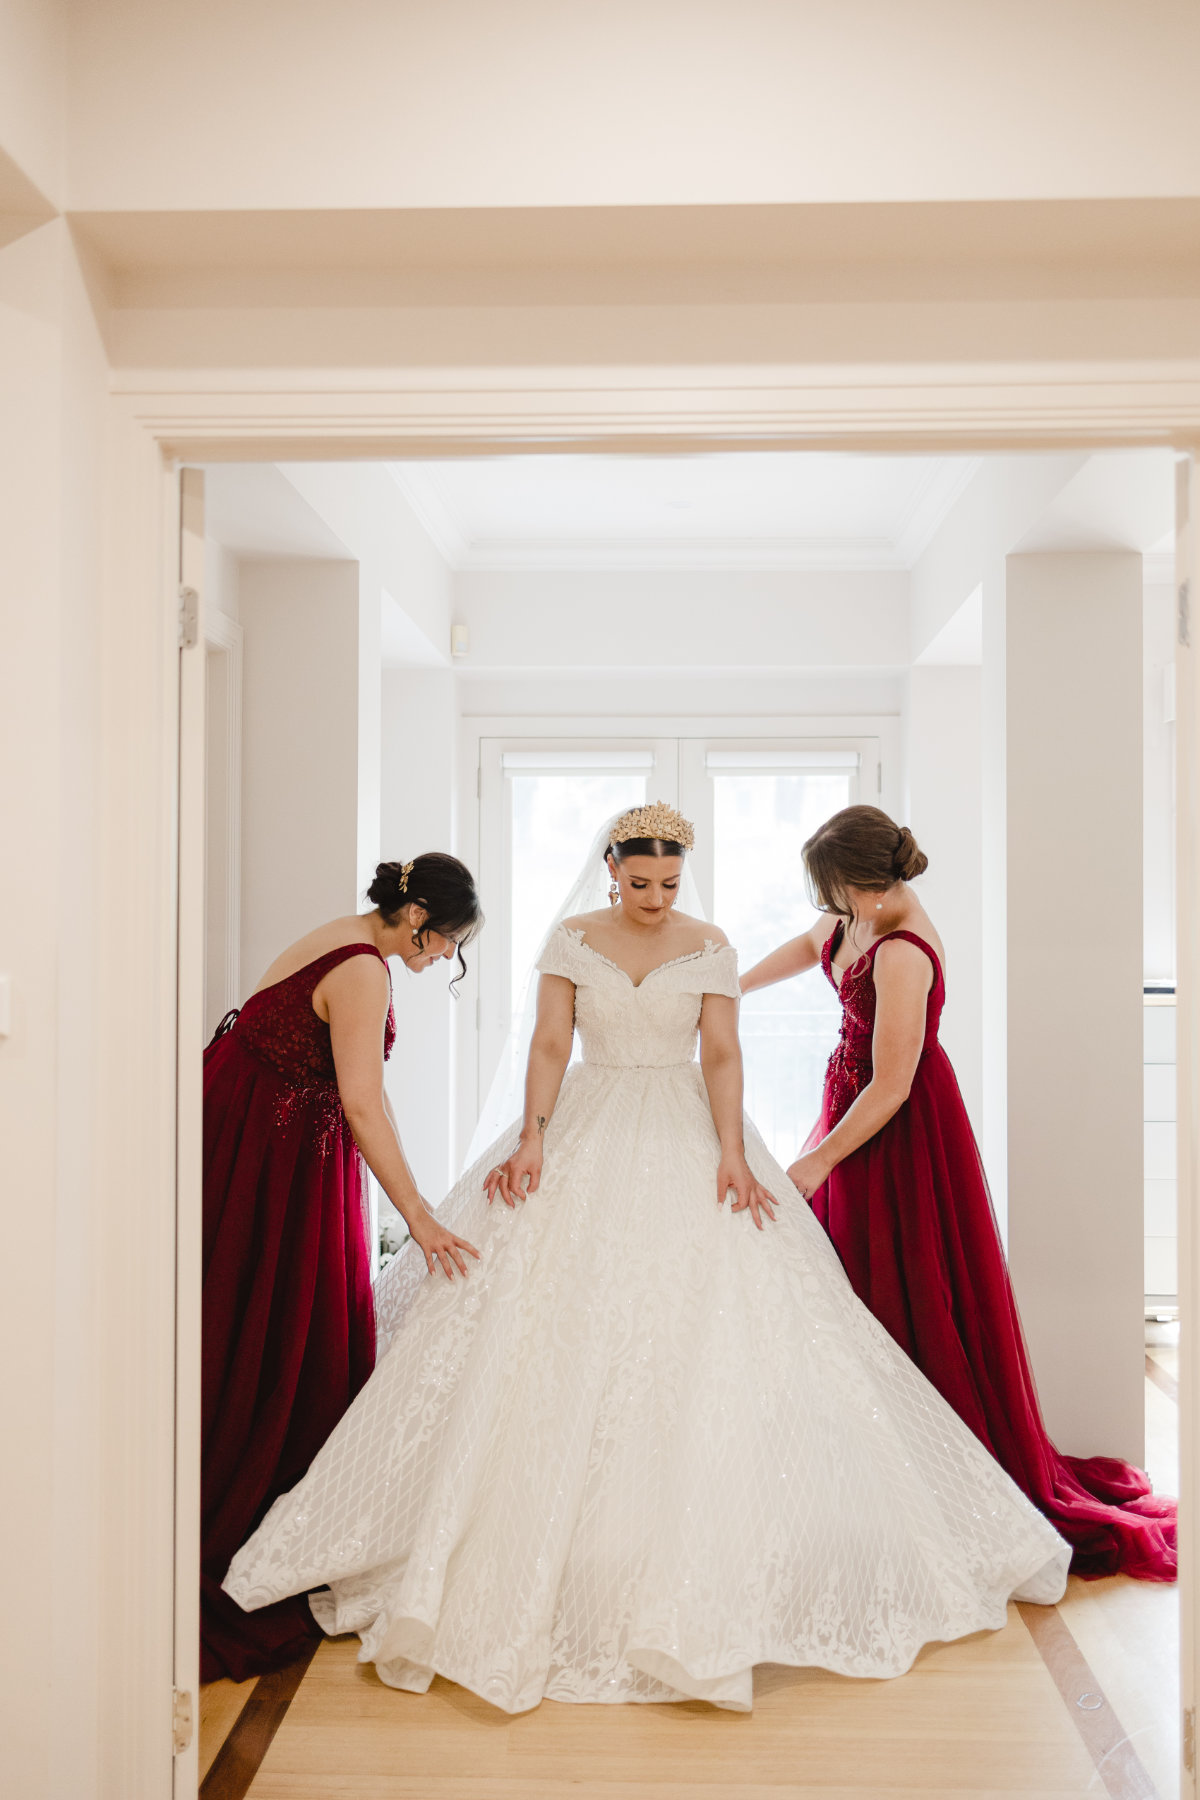 Grace and Anthony's Melrose Receptions wedding photographed by T One Image